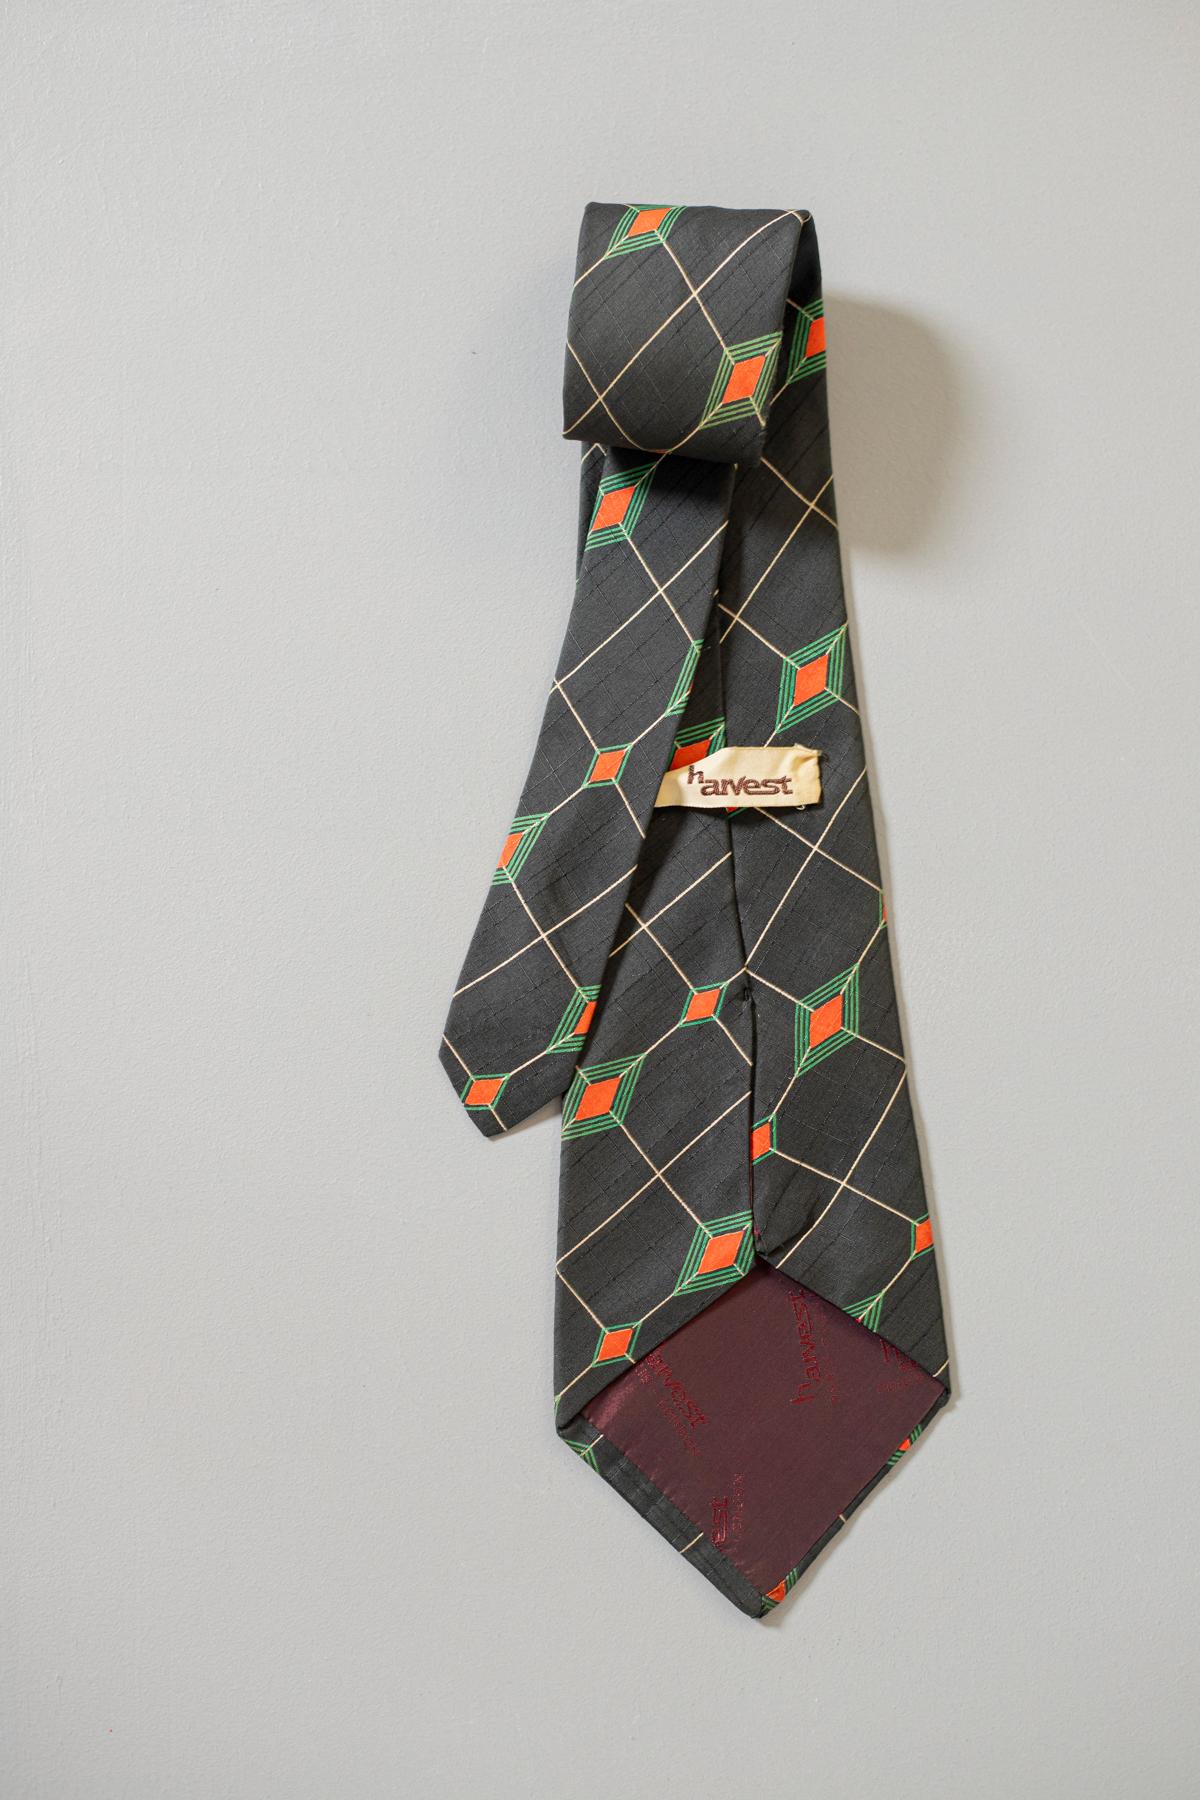 Black Vintage Harvest 100% silk black tie with small red rhombuses  For Sale